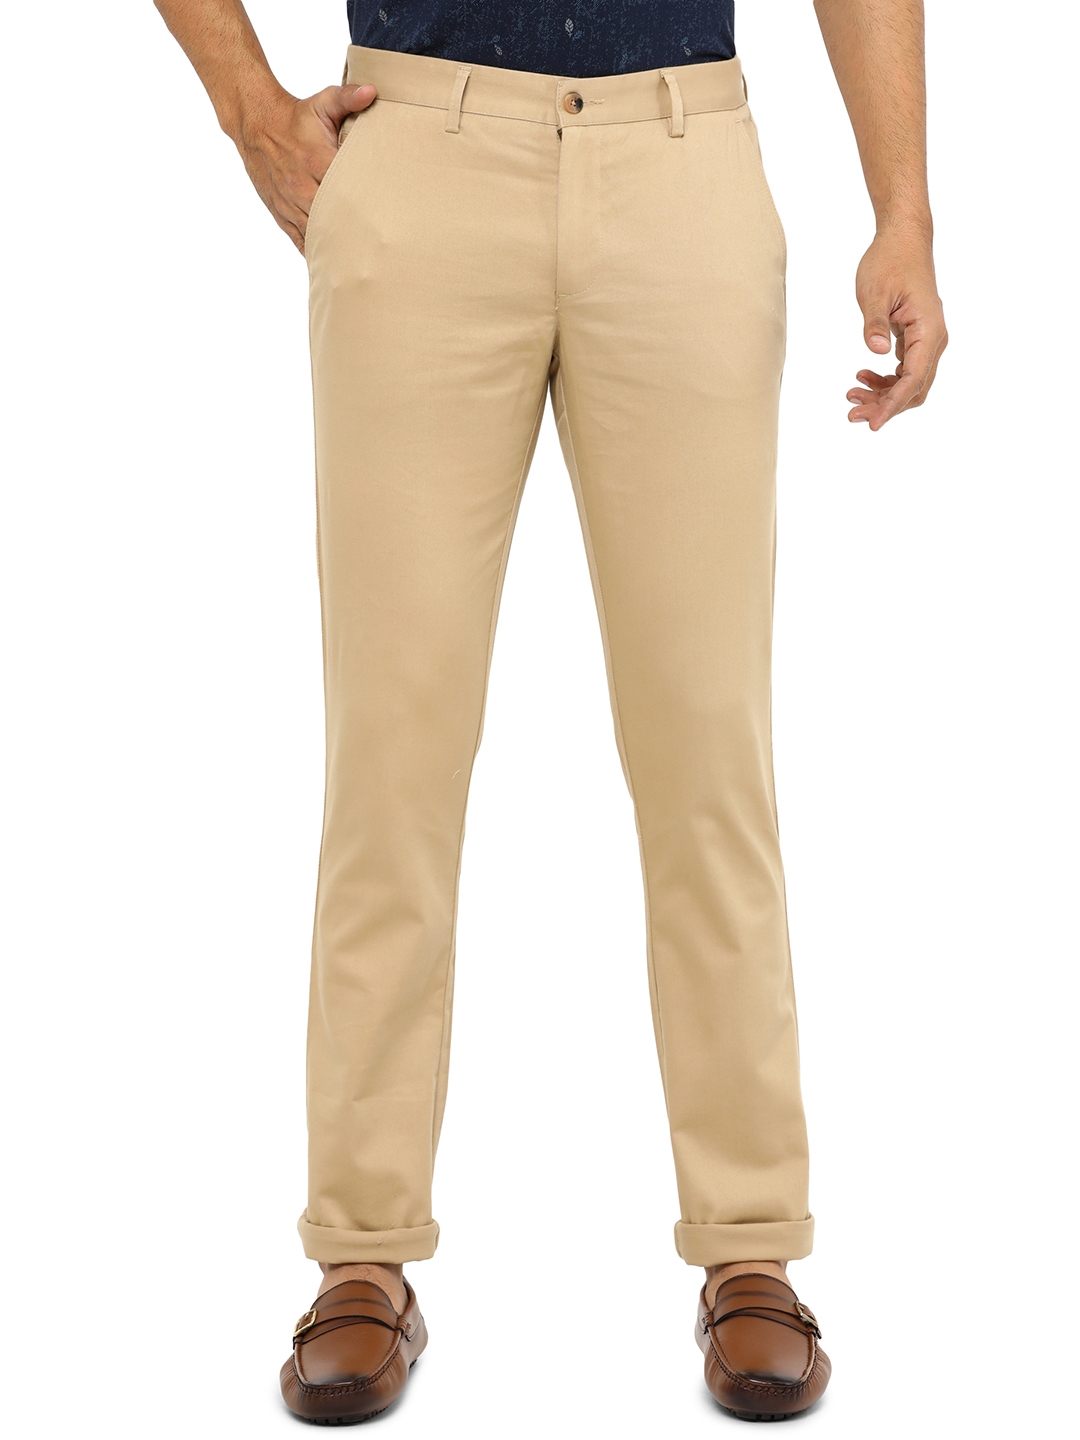 Greenfibre | Beige Solid Super Slim Fit Casual Trouser | Greenfibre 0